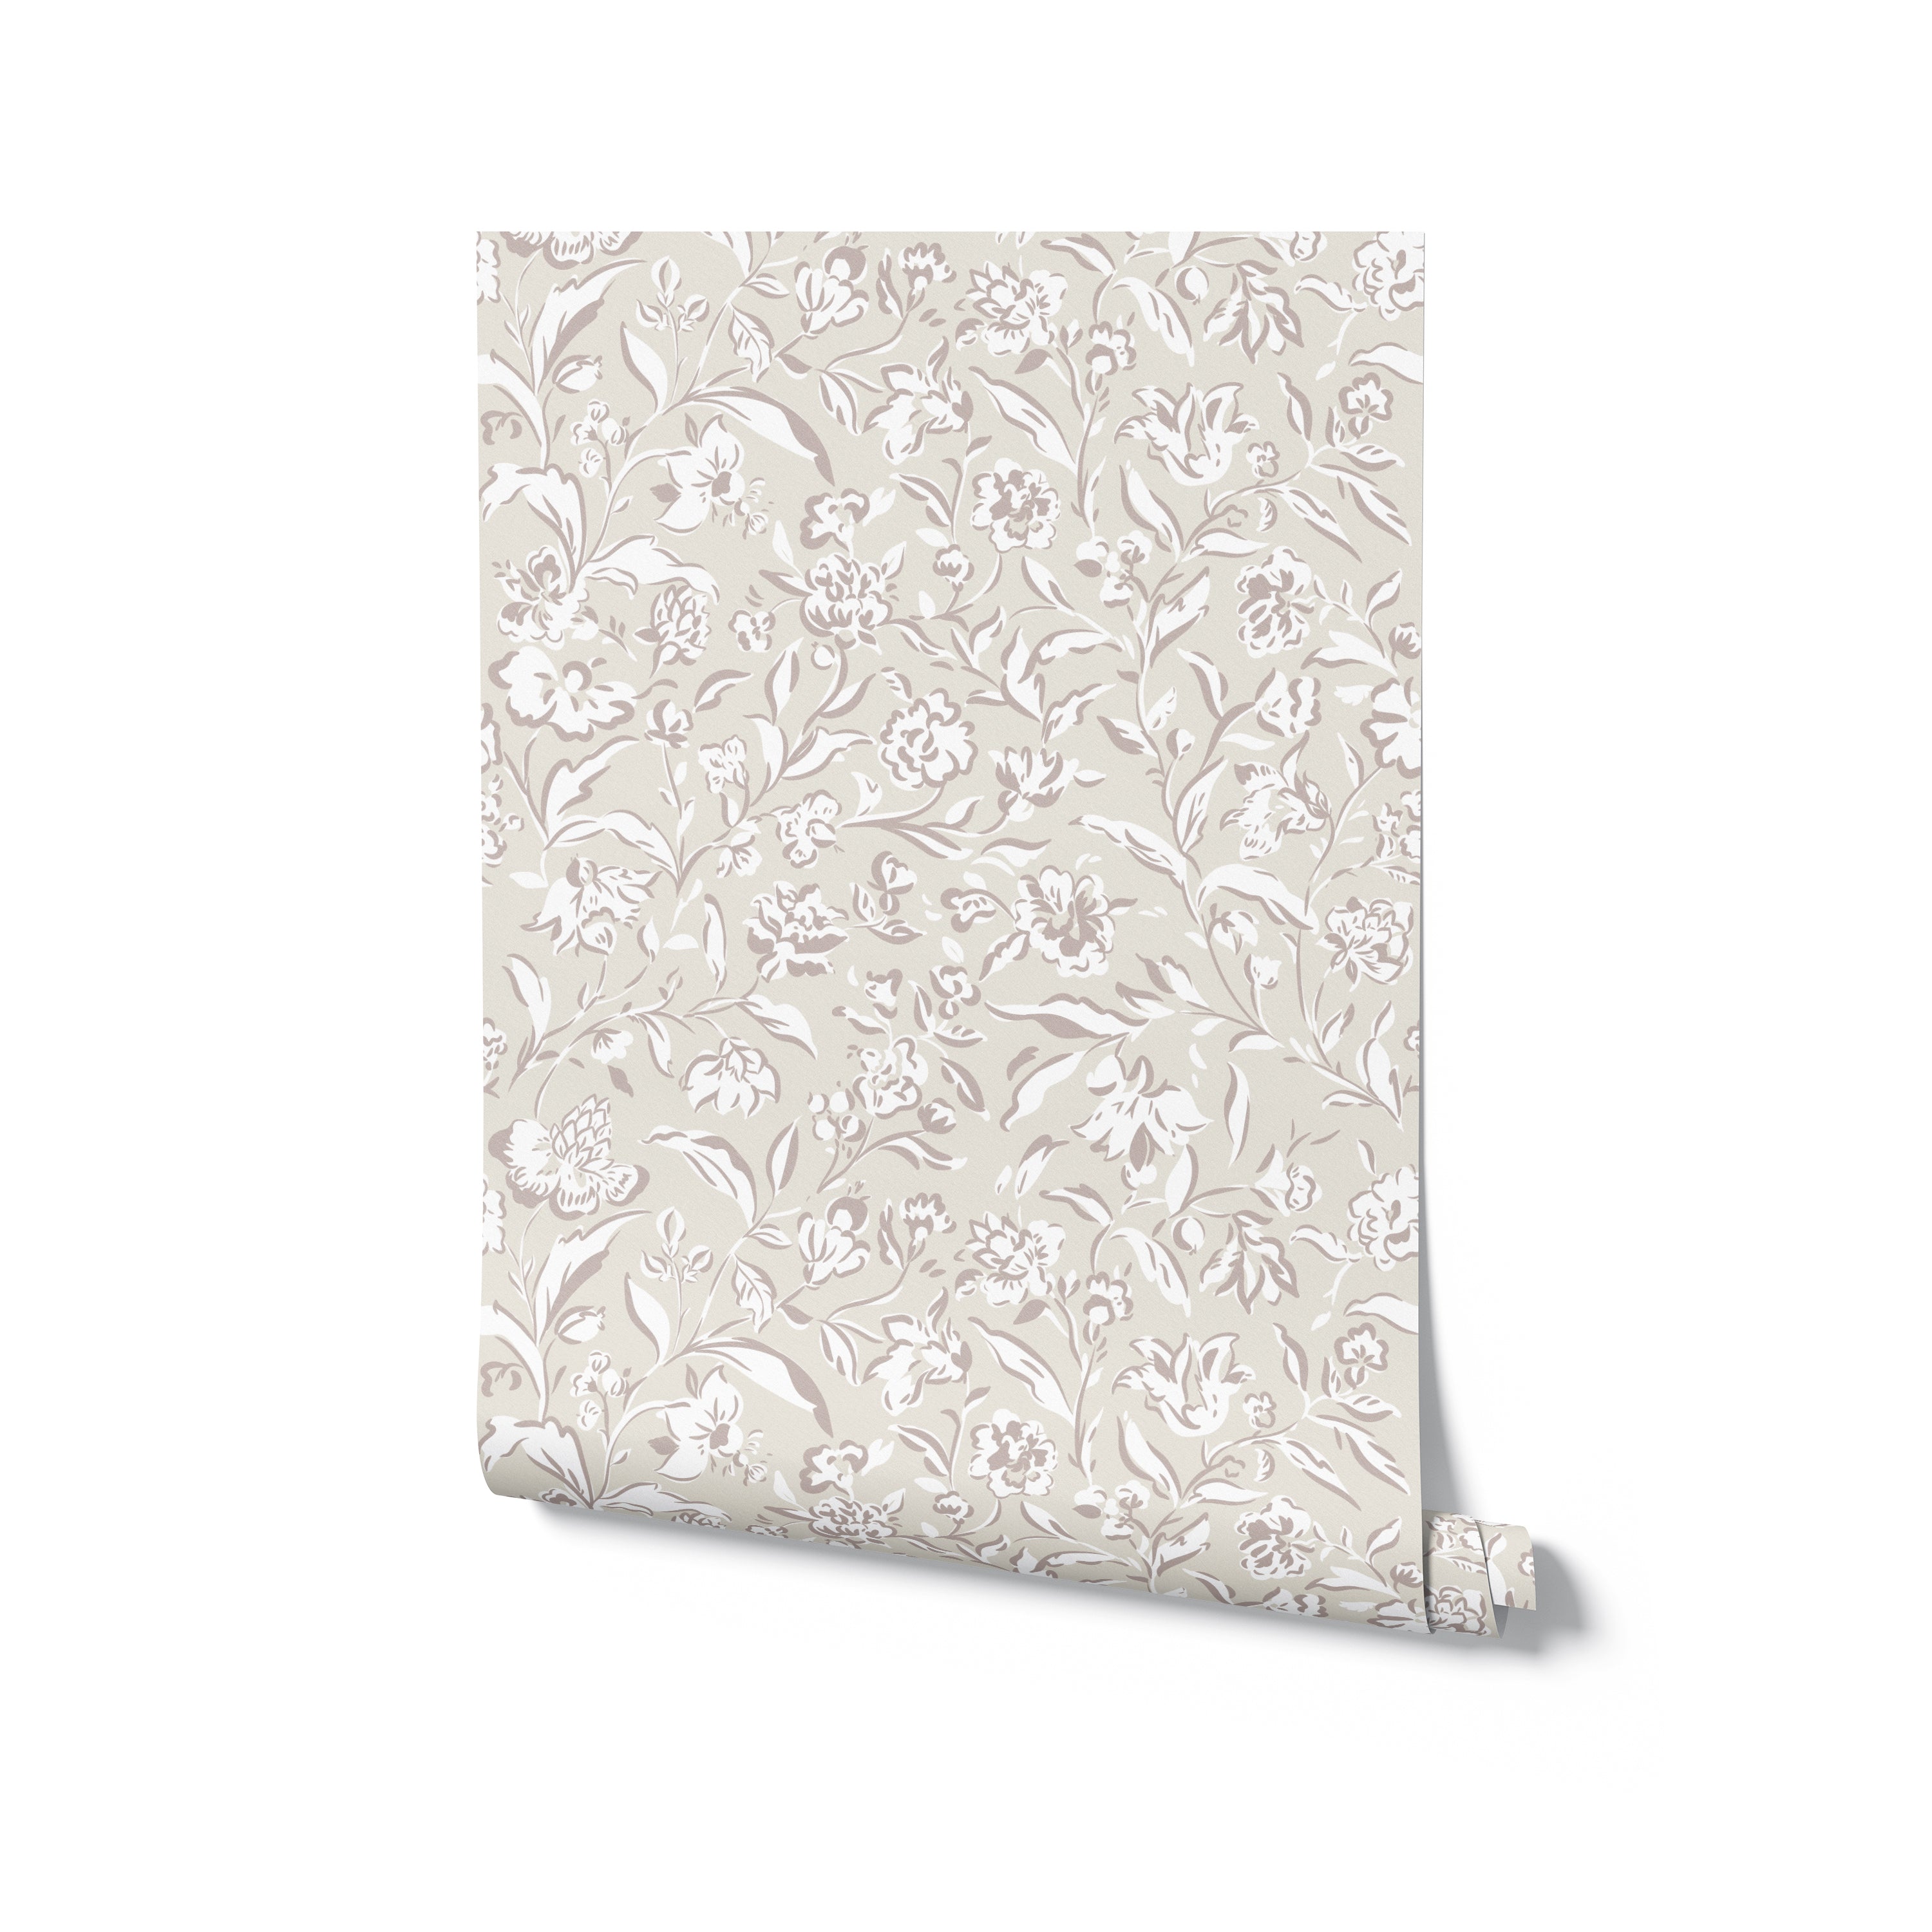 A visualization of the Boho Sketchy Floral Wallpaper roll, illustrating the seamless flow of the floral design. The wallpaper features a soft beige color scheme with a detailed drawing of flowers and foliage, ideal for adding a subtle artistic touch to home decor.